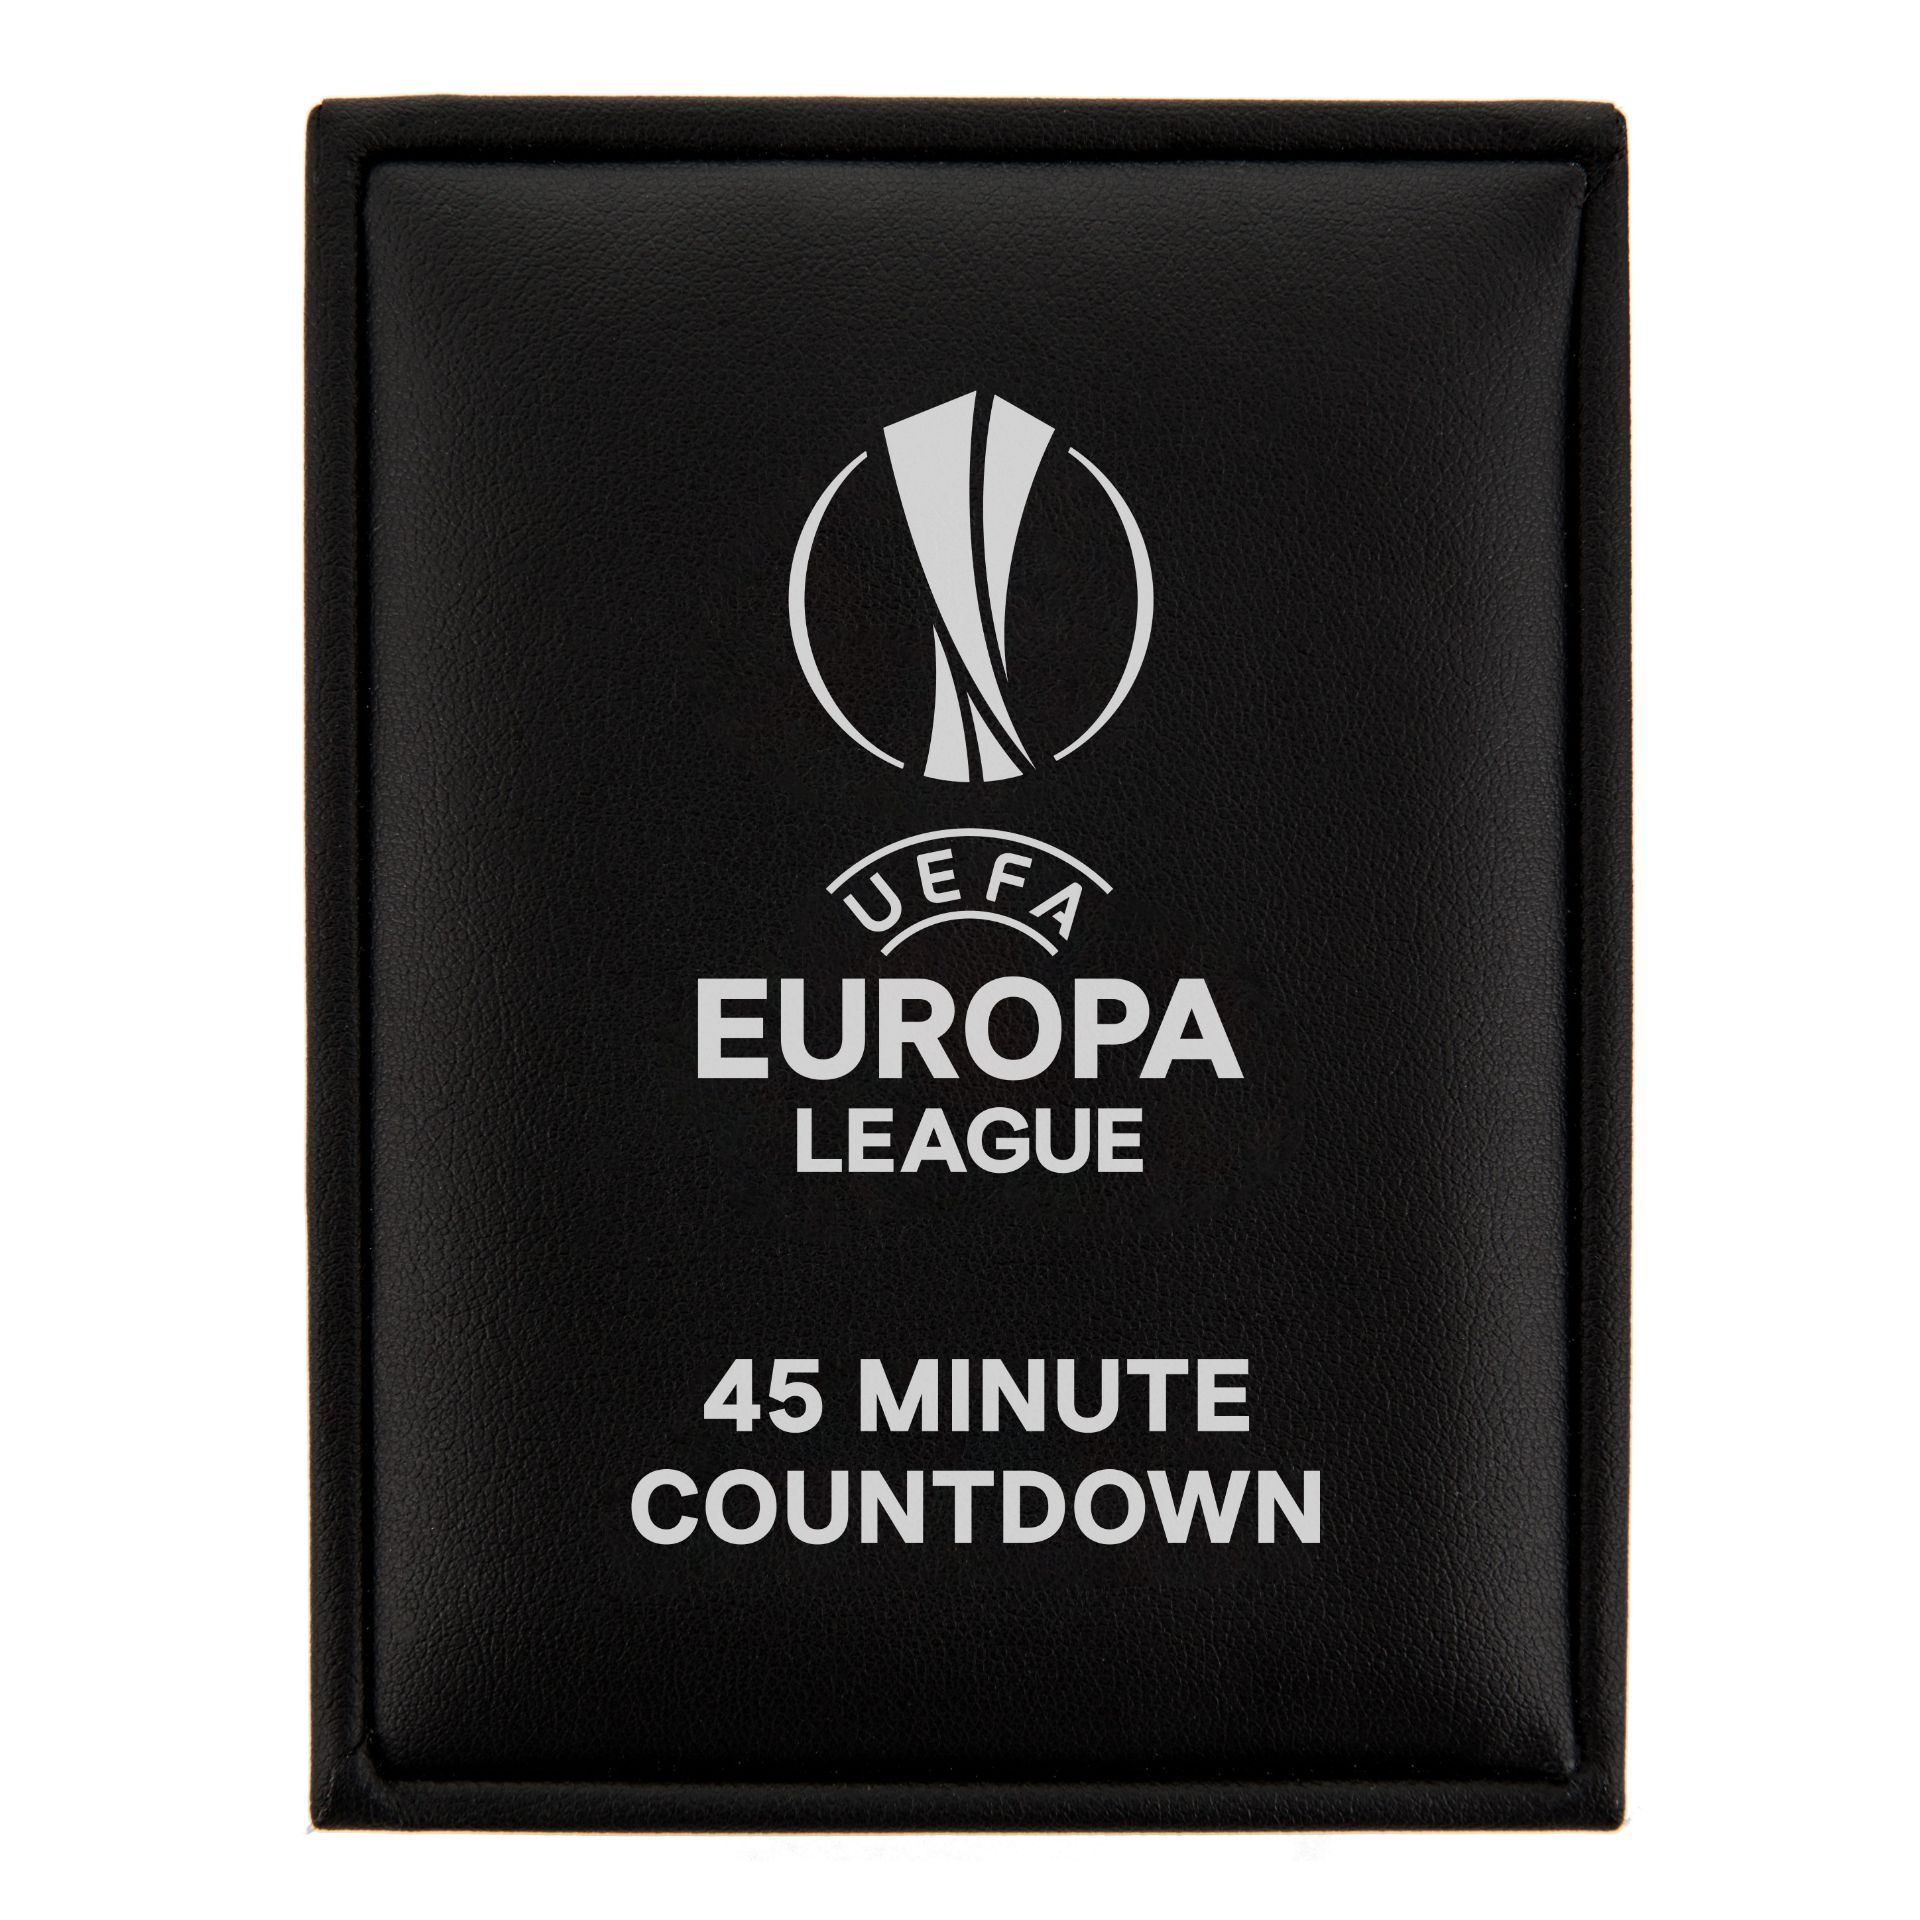 BRAND NEW OFFICIAL UEFA EUROPA LEAGUE 45 MINUTES COUNTDOWN WATCH EL45-BLKB-BLORP, RRP £225 - Image 5 of 5